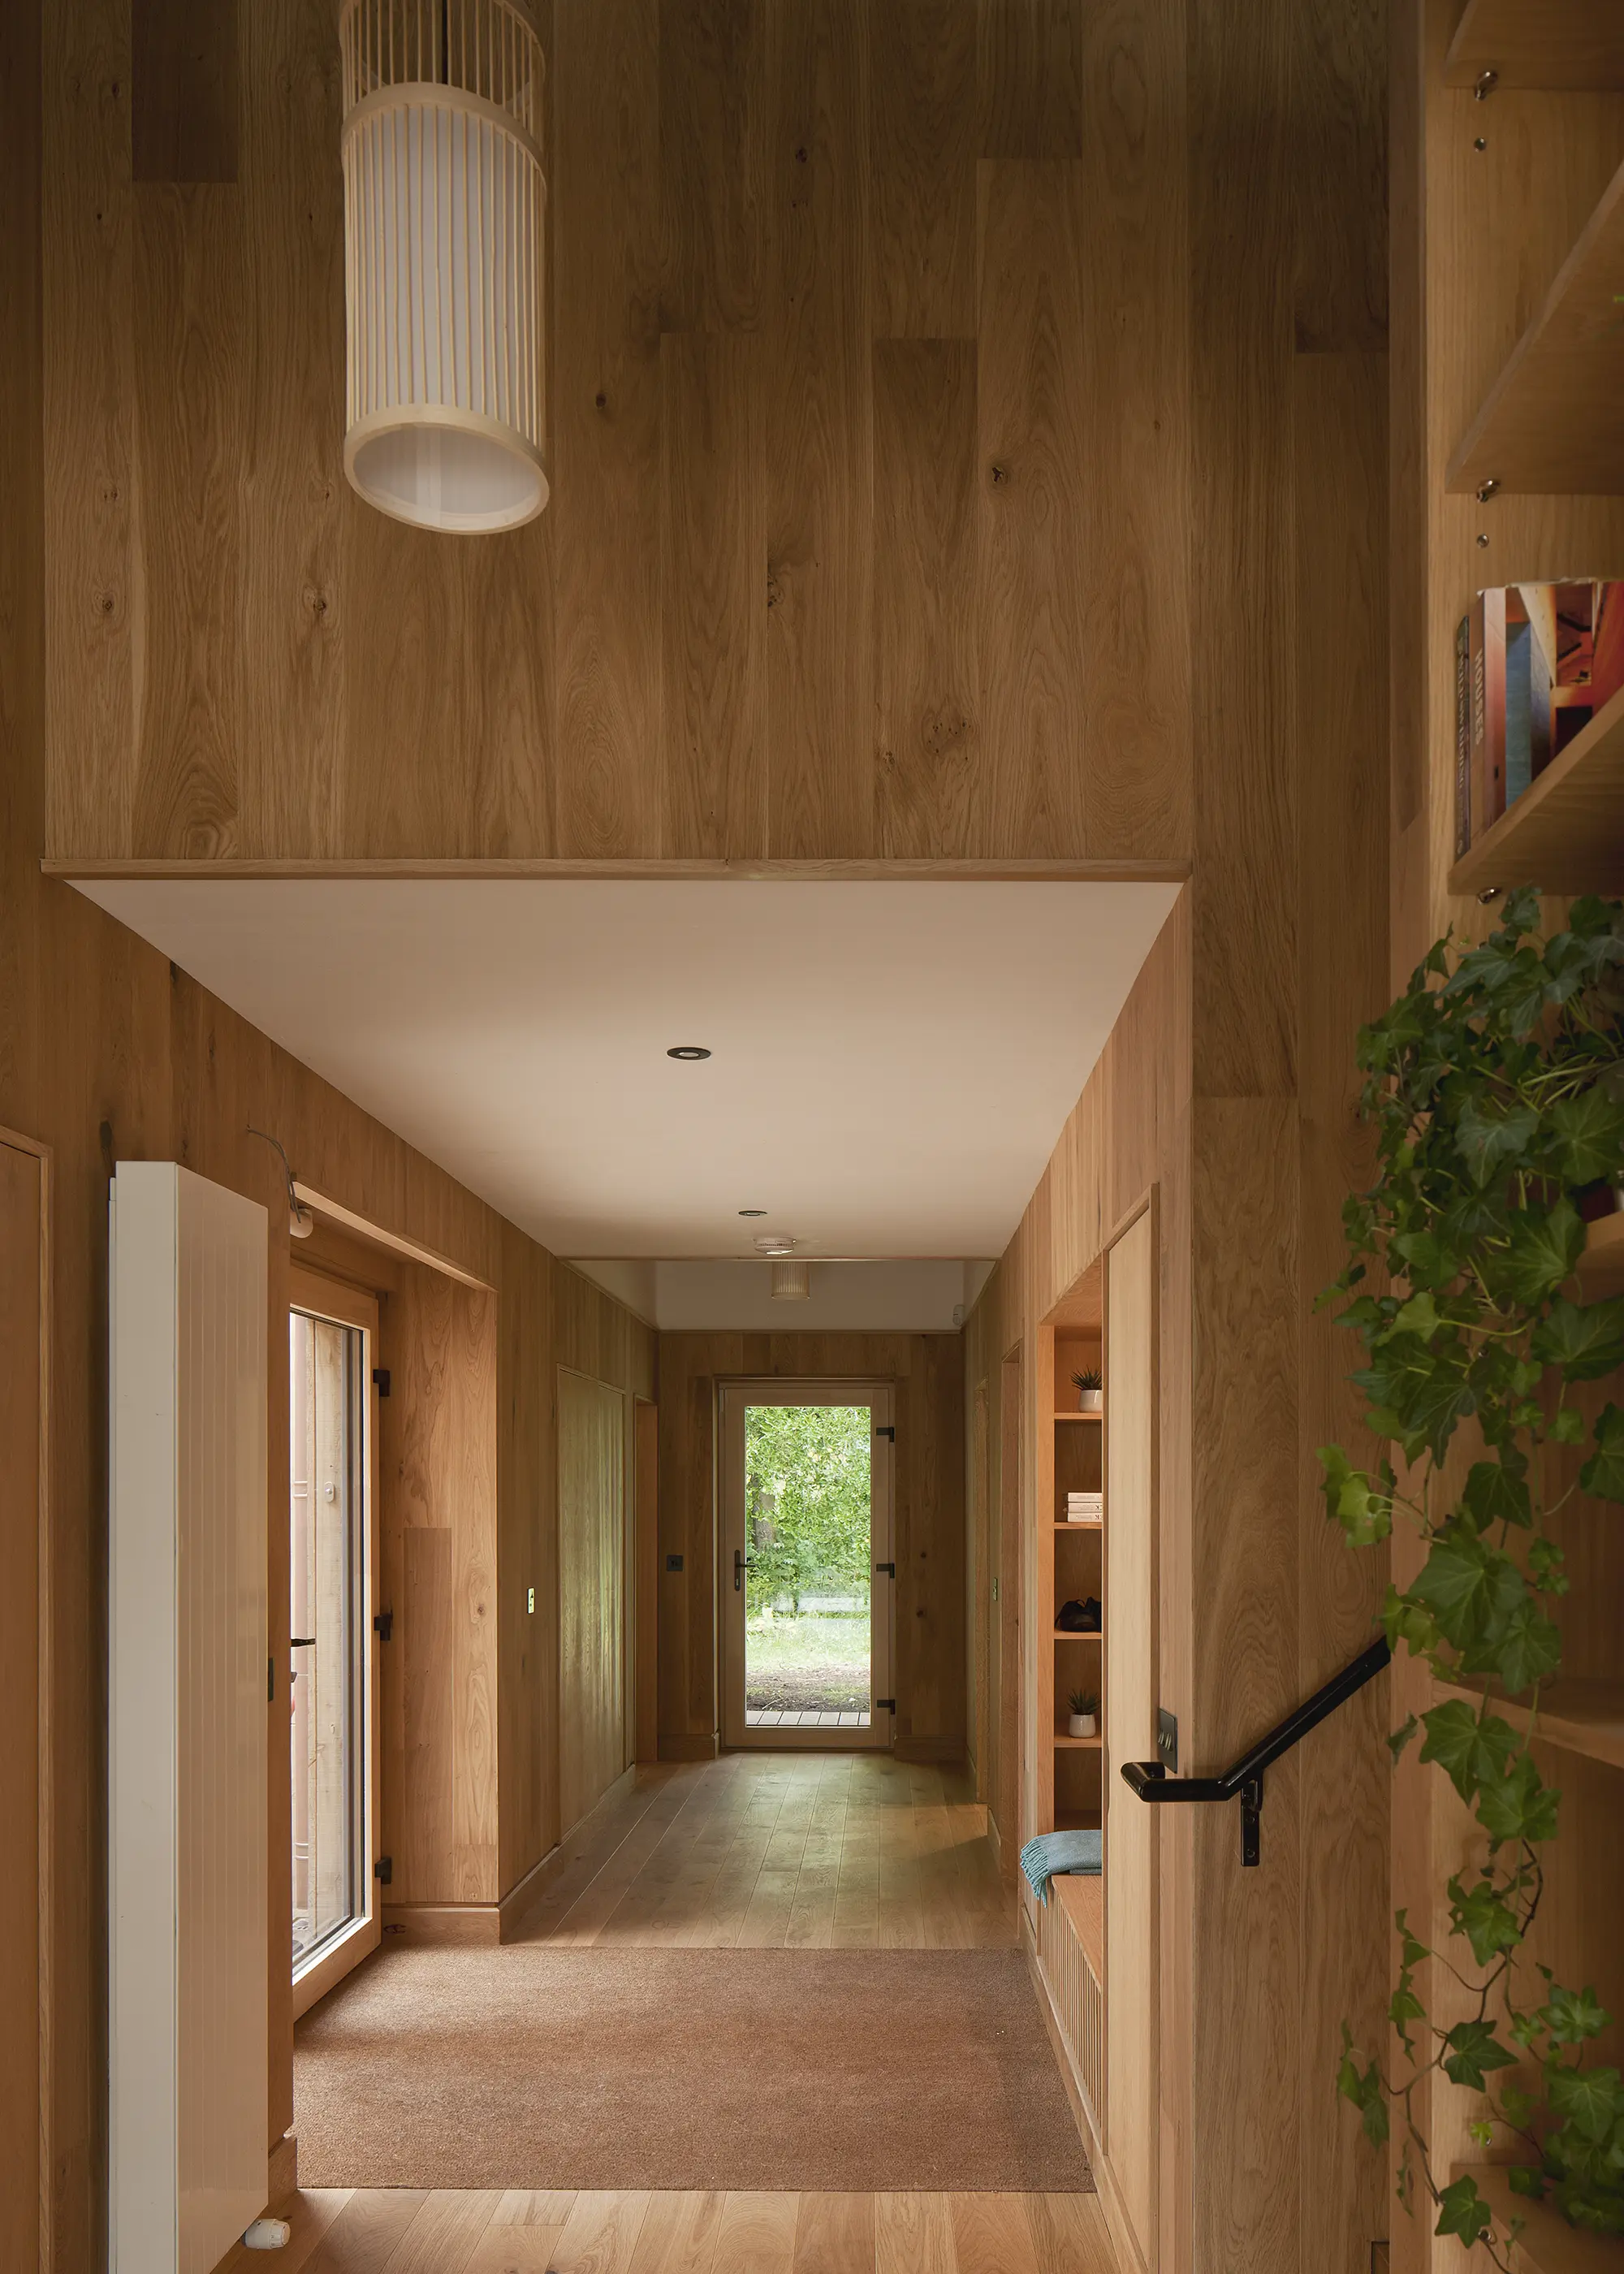 Sympathetic Timber-Clad Eco Home